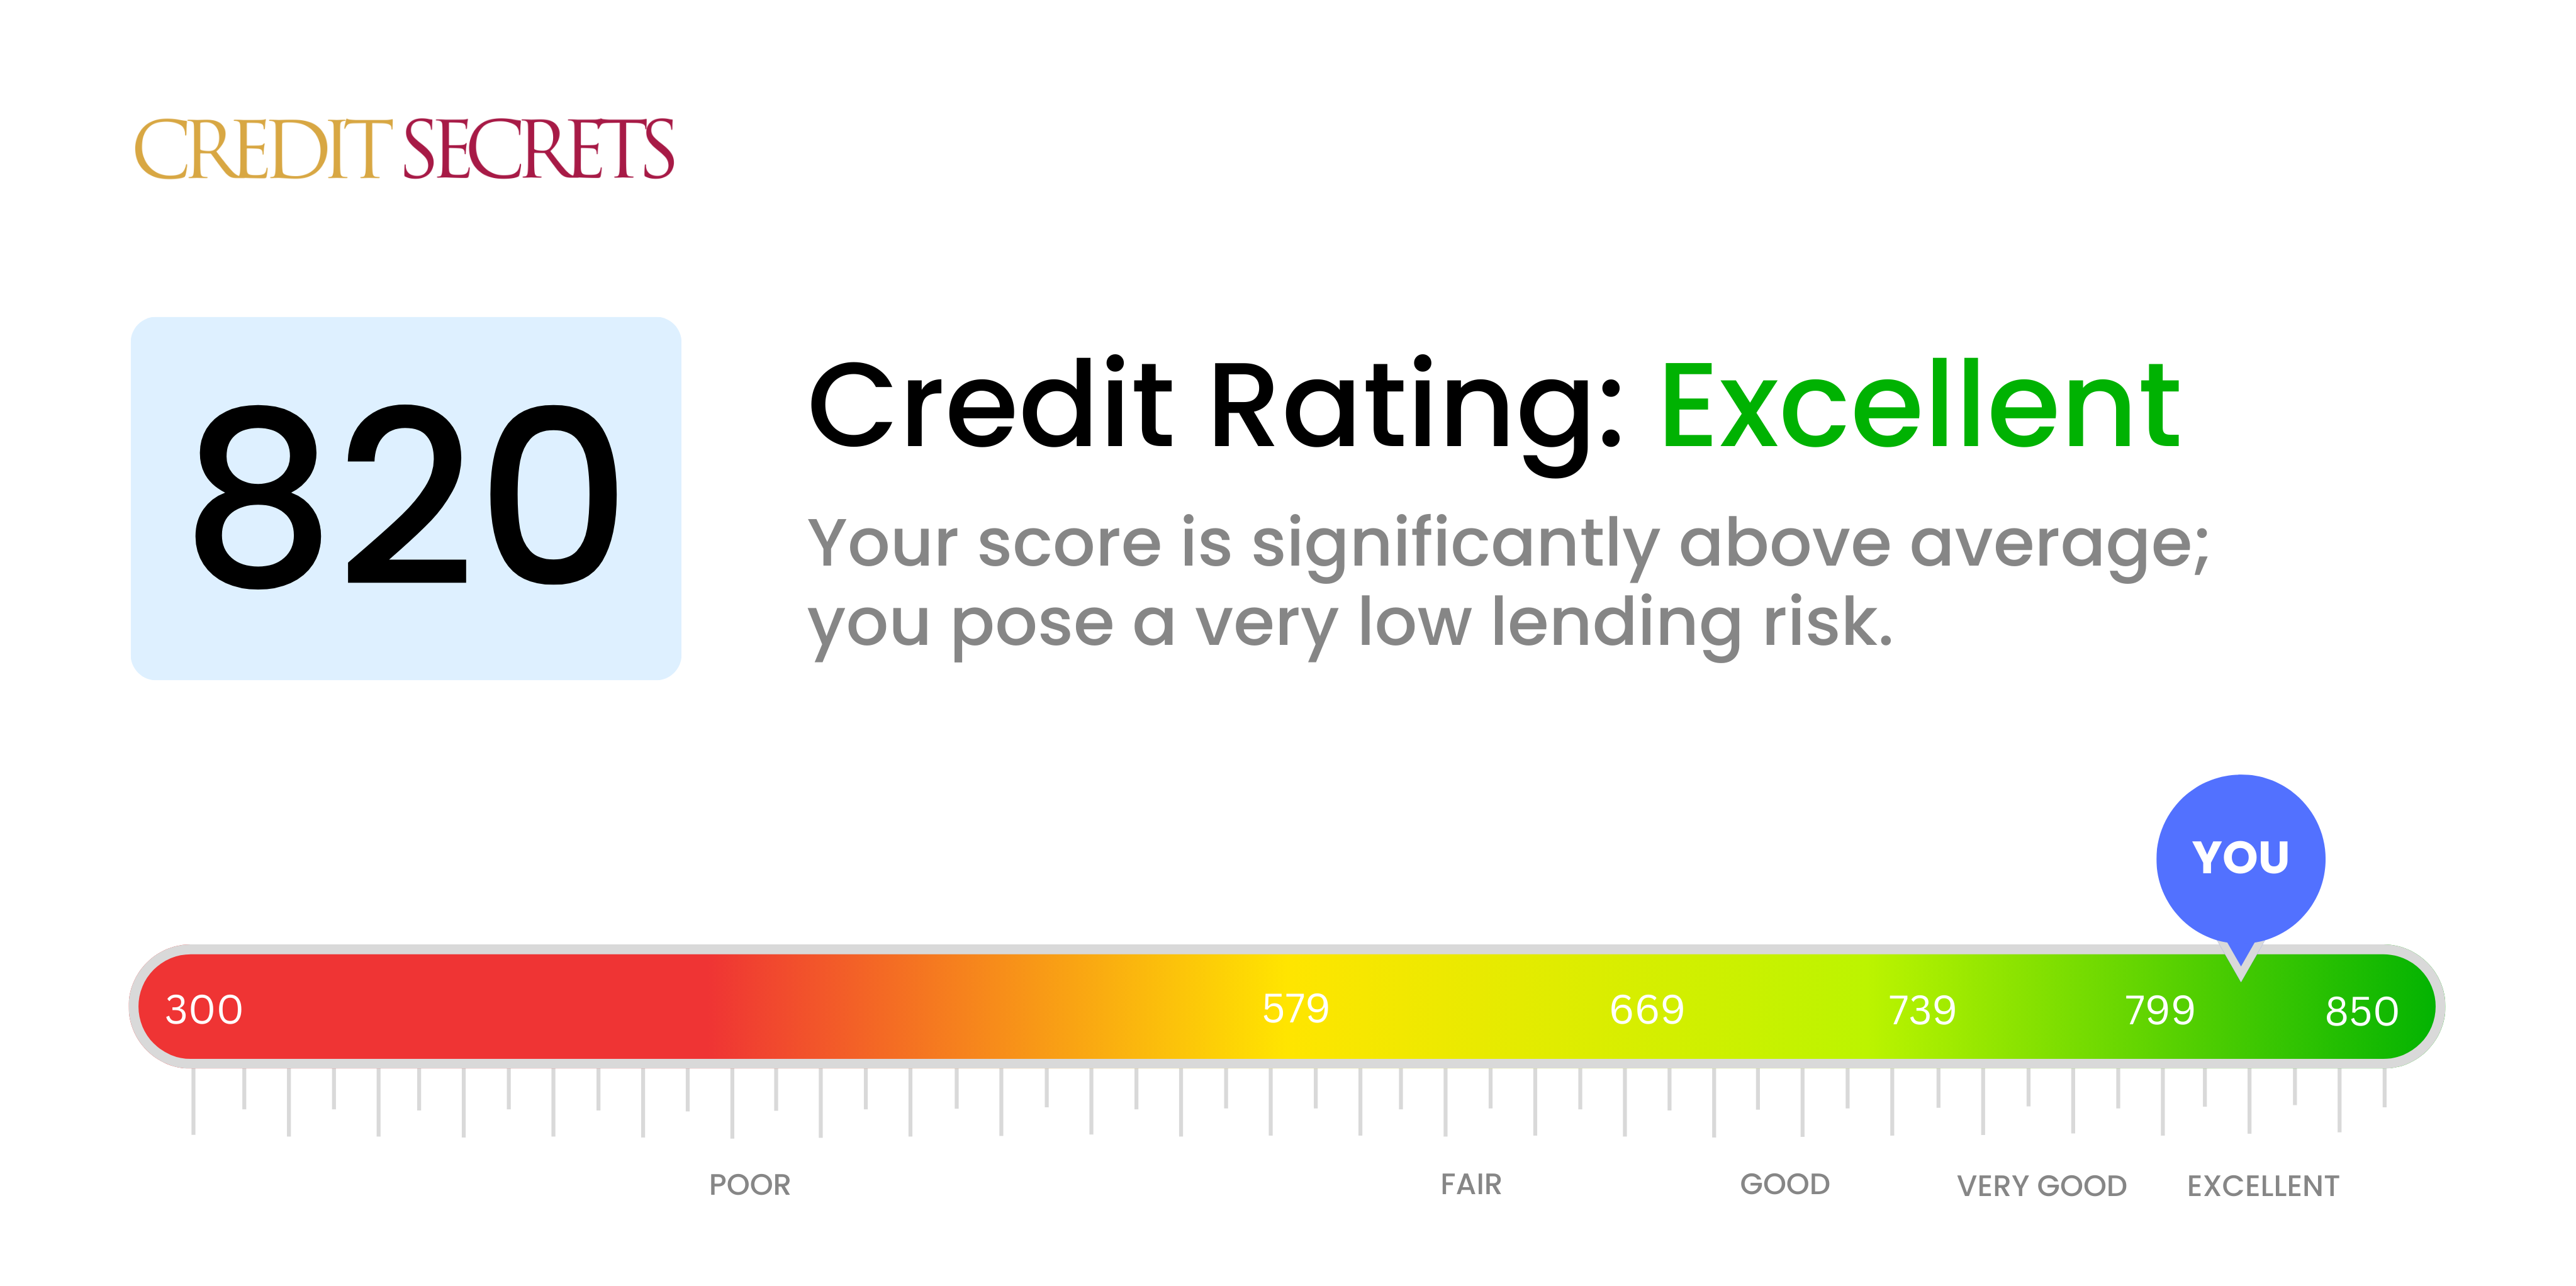 Is 820 a good credit score?